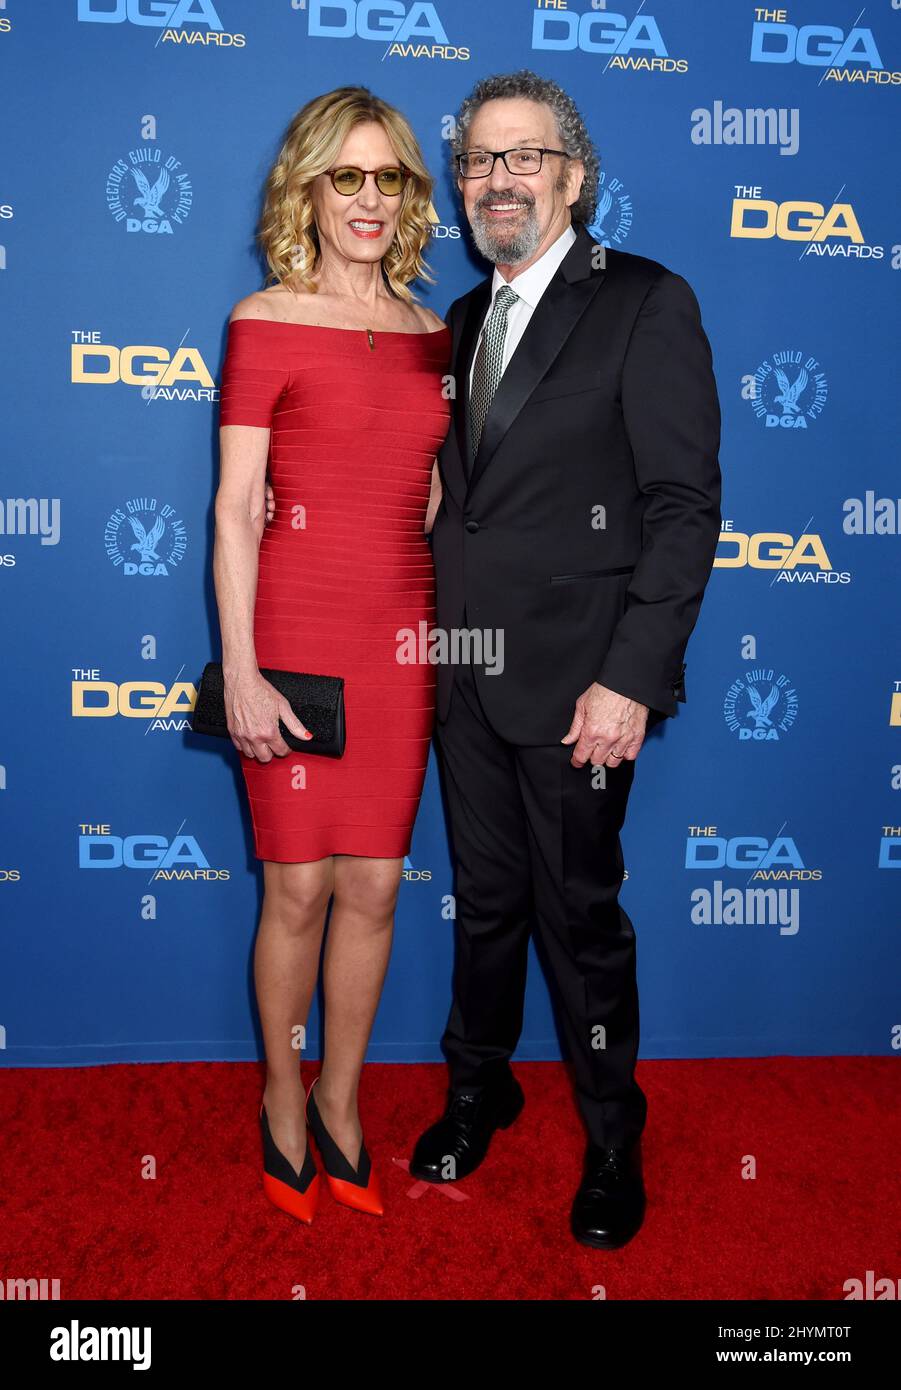 Christine Lahti and Thomas Schlamme at the 72nd Annual Directors Guild of America Awards held at the The Ritz Carlton on January 25, 2020 in Los Angeles, CA. Stock Photo